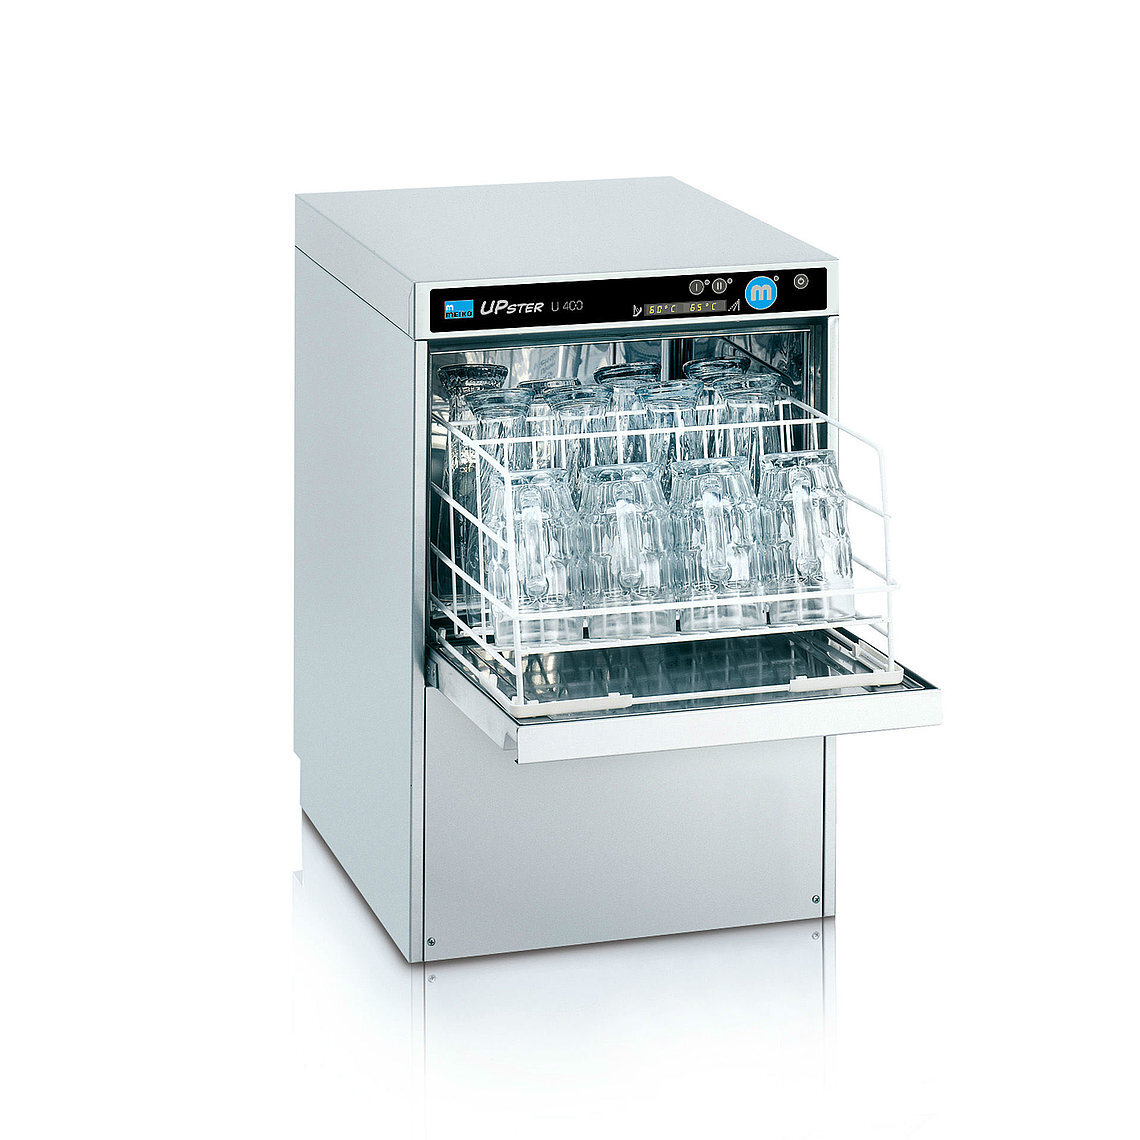 Meiko introduces first bottle washing system compatible with